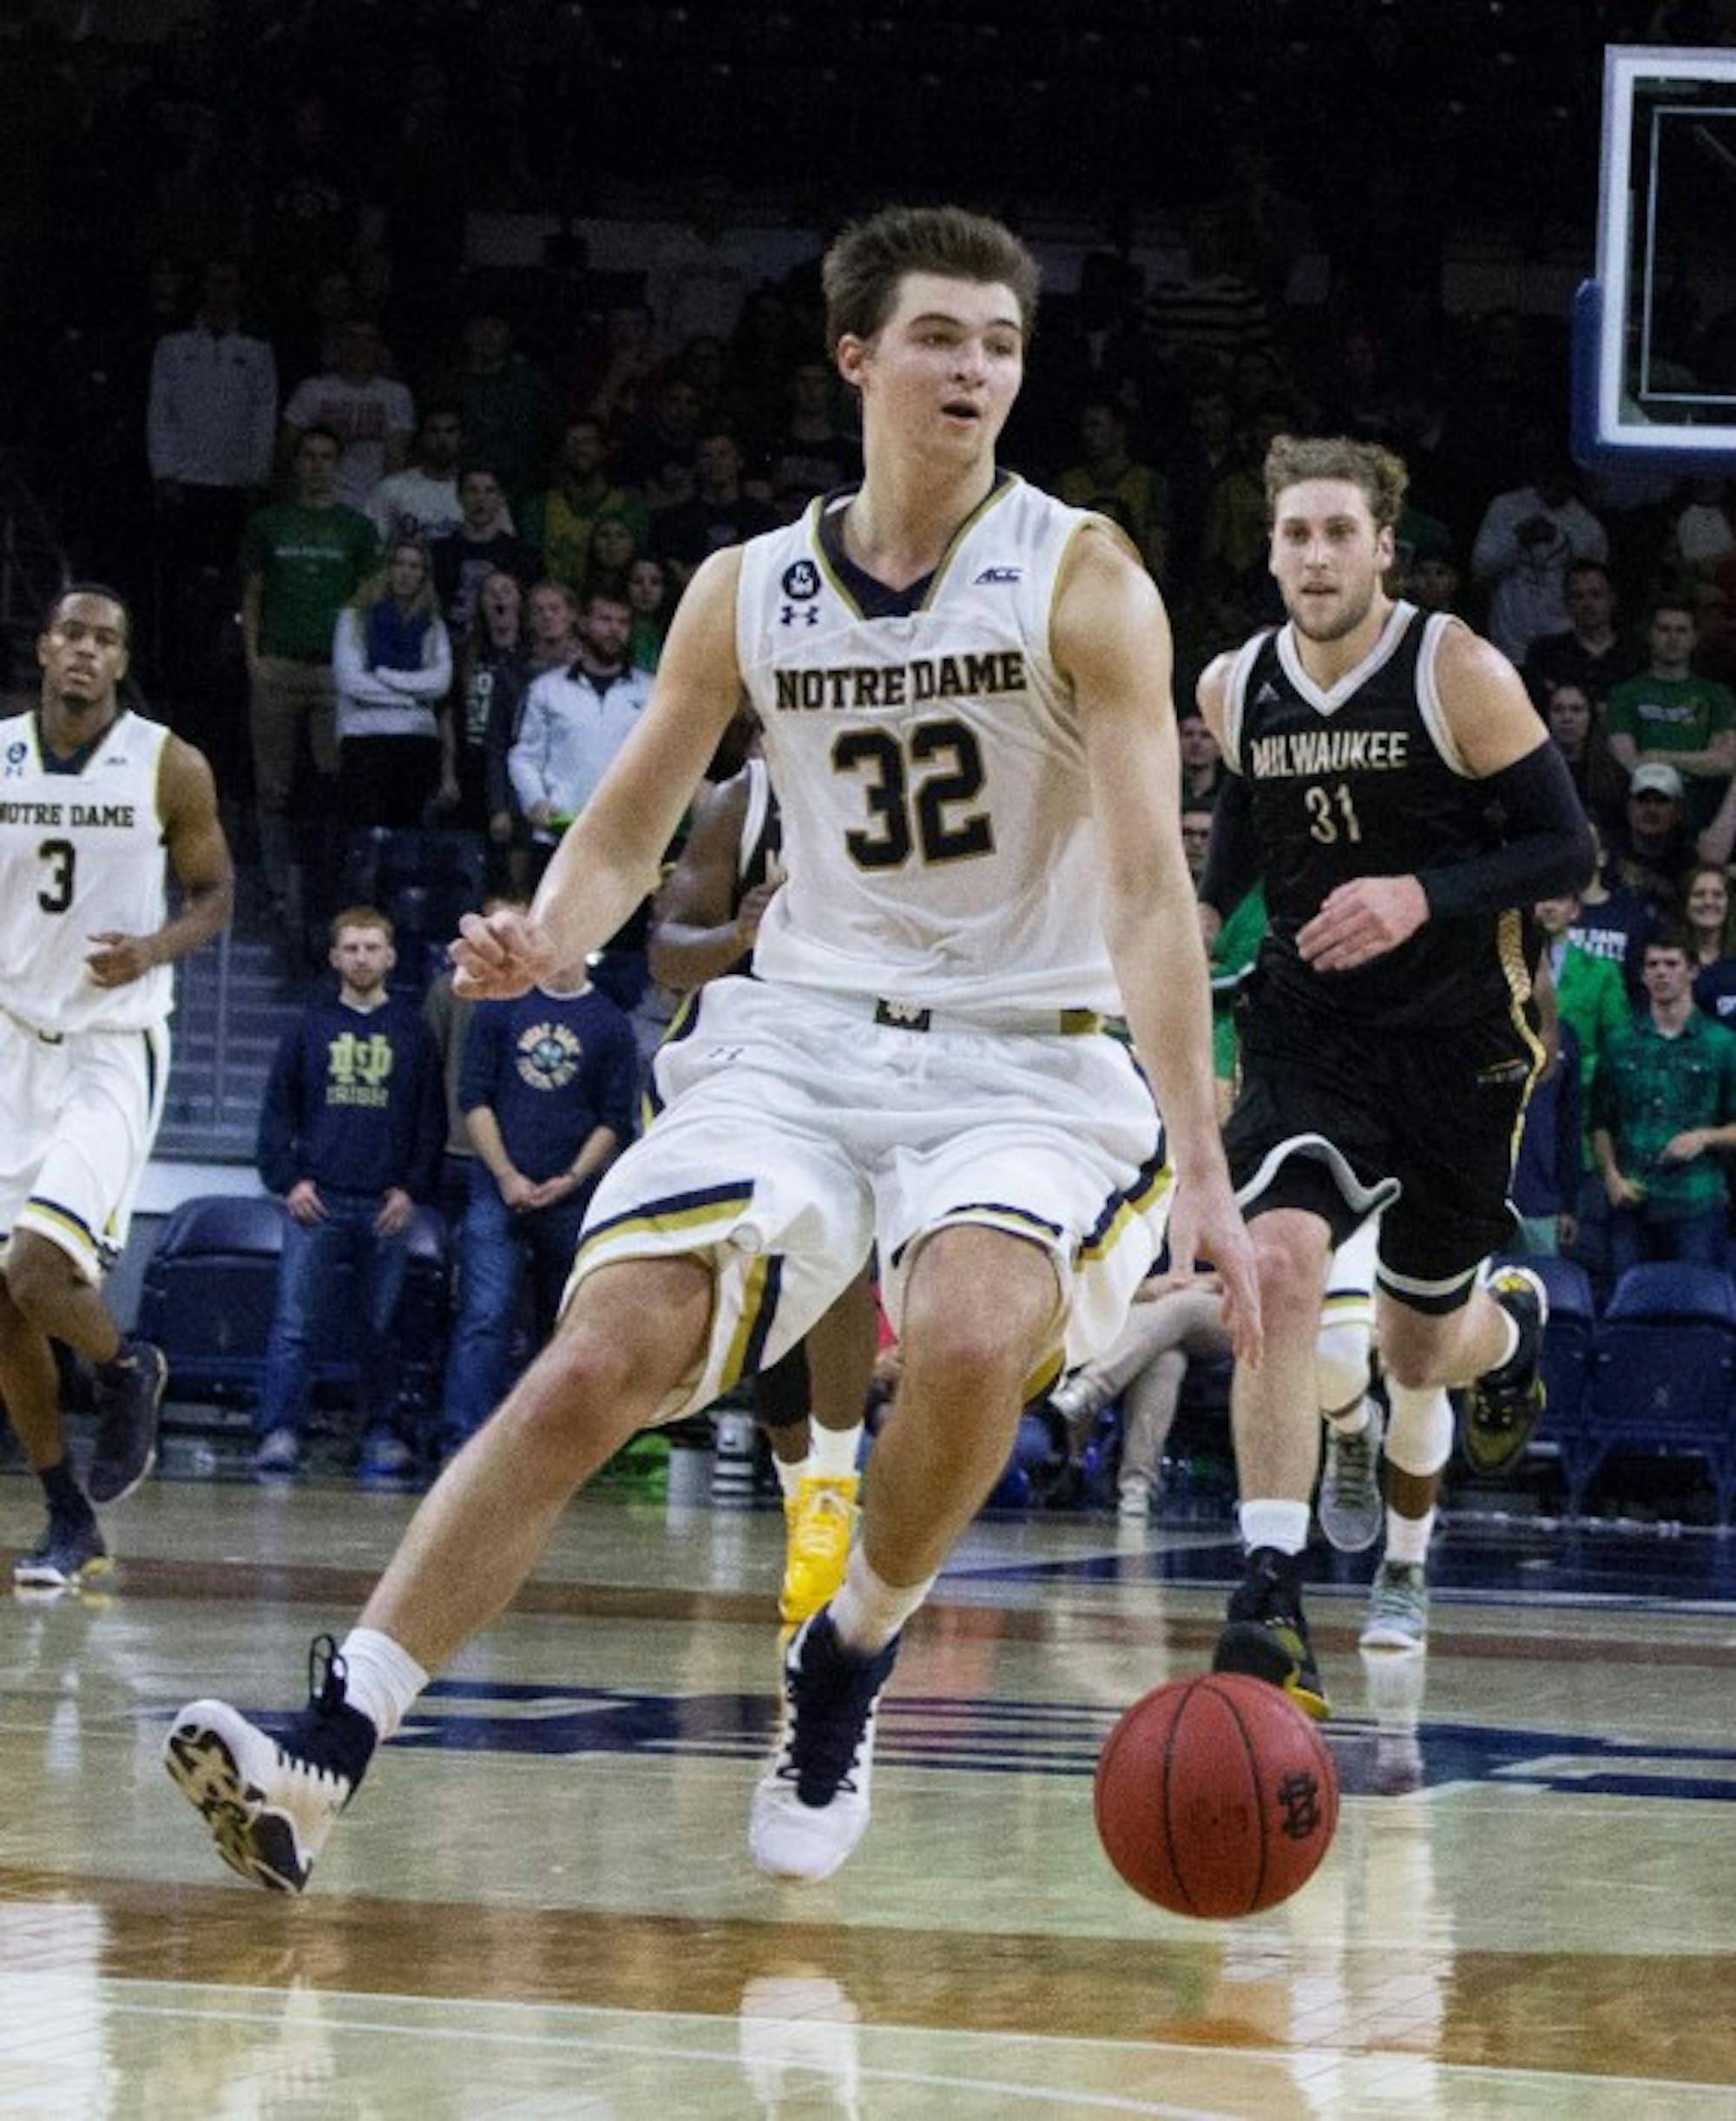 Sophomore guard Steve Vasturia dribbles the ball during Notre Dame’s 86-78 win over Milwaukee on Nov. 21 at Purcell Pavilion.